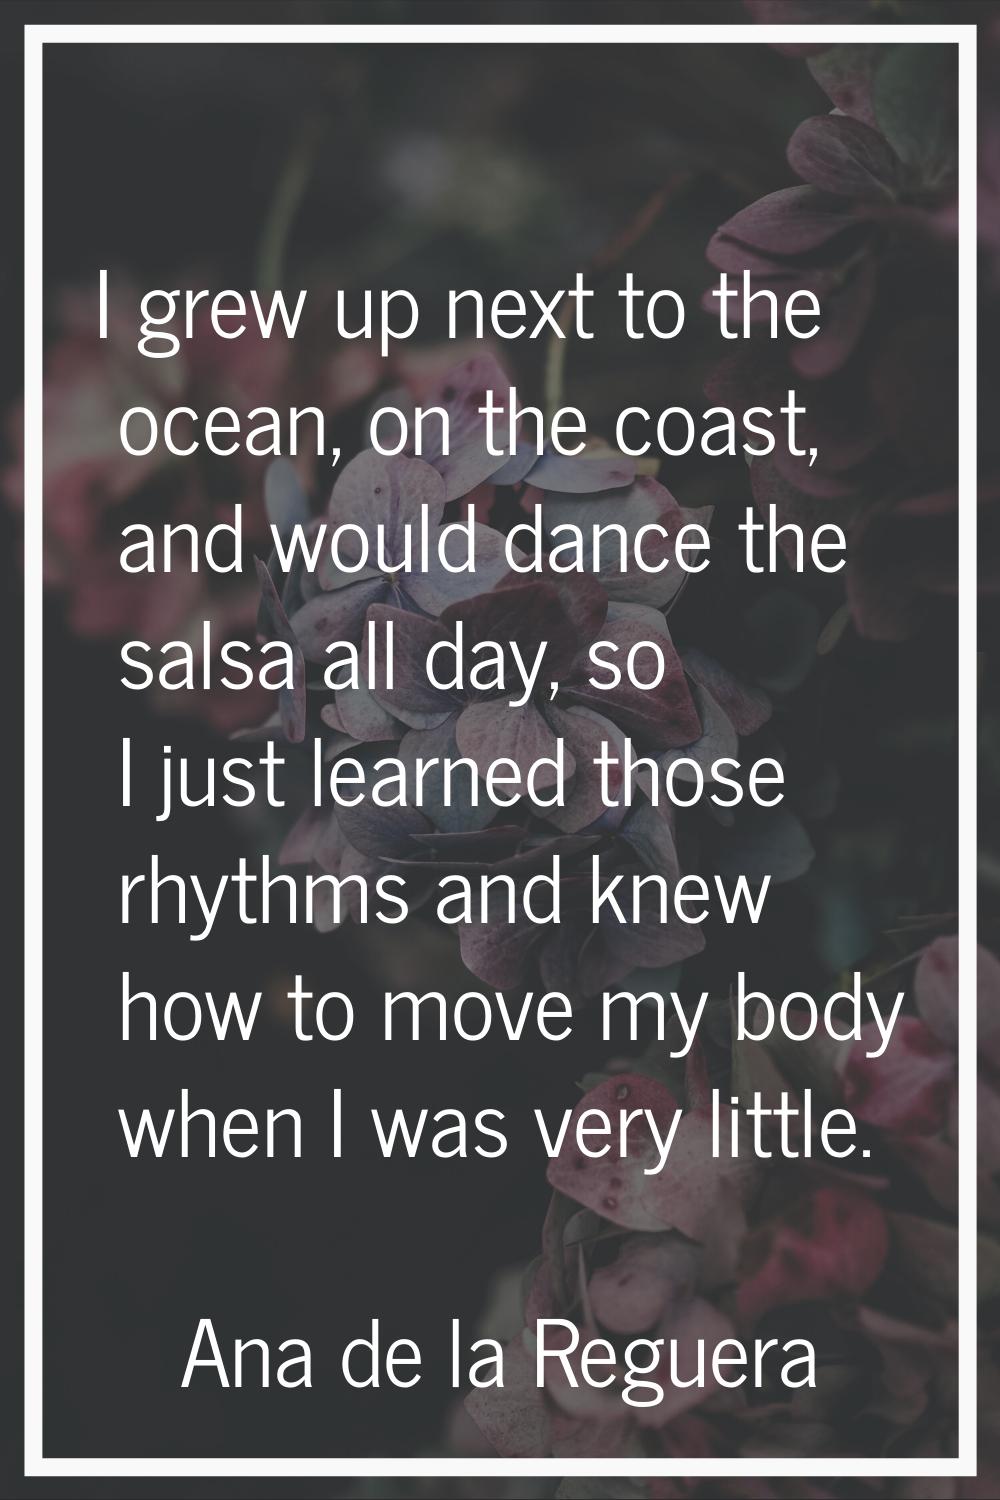 I grew up next to the ocean, on the coast, and would dance the salsa all day, so I just learned tho